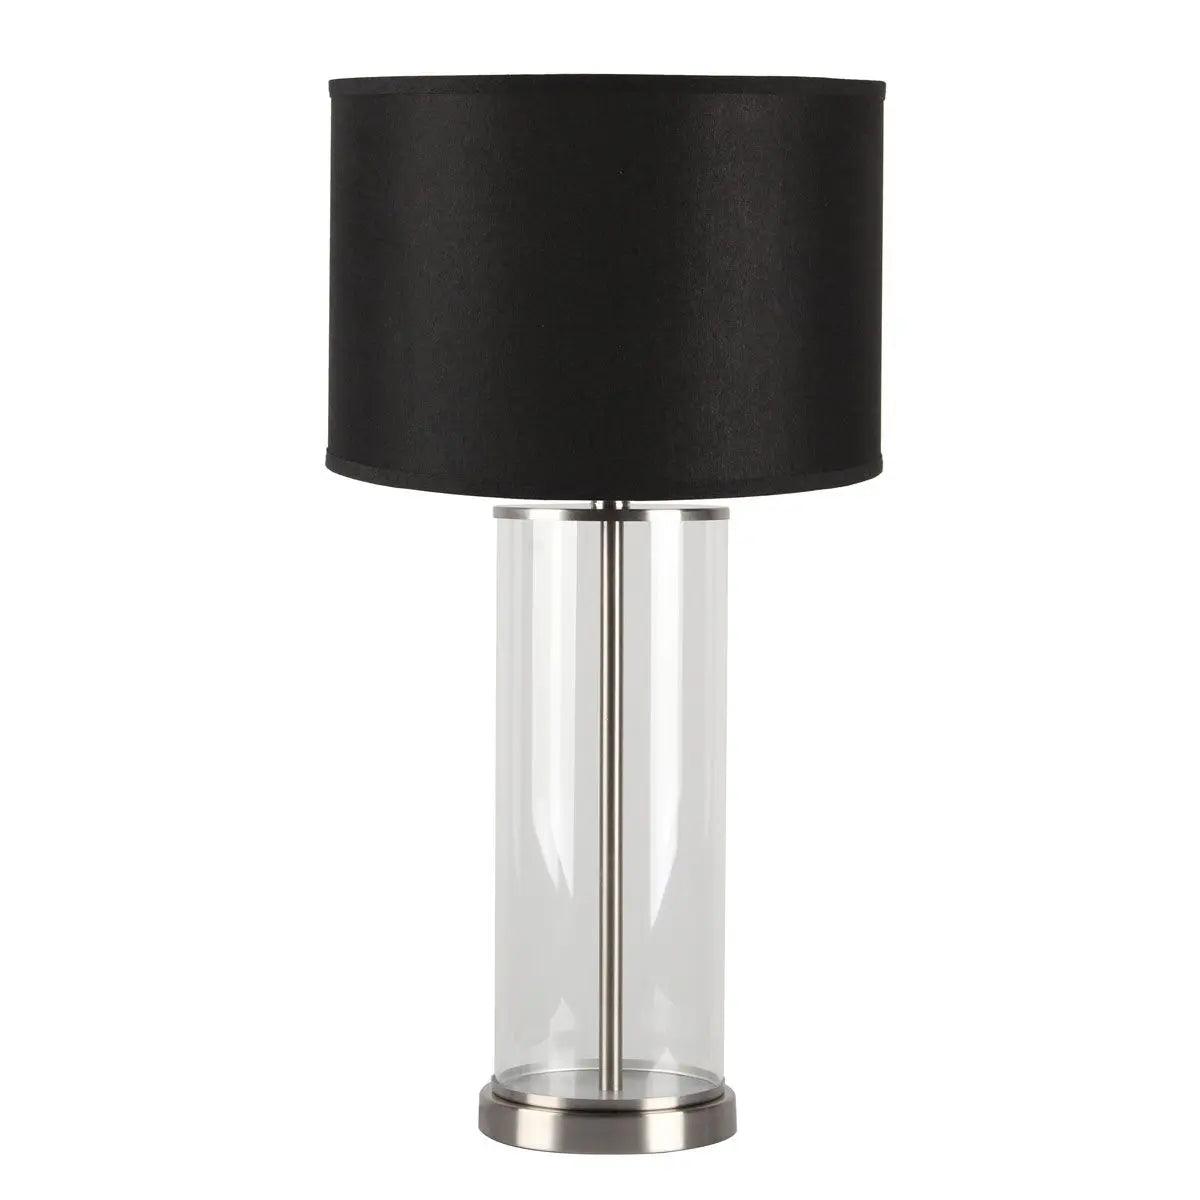 Cafe Lighting & Living Left Bank Table Lamp - Nickel w Black Shade - Table Lamp and ShadeB122639320294119136+9320294119150 1